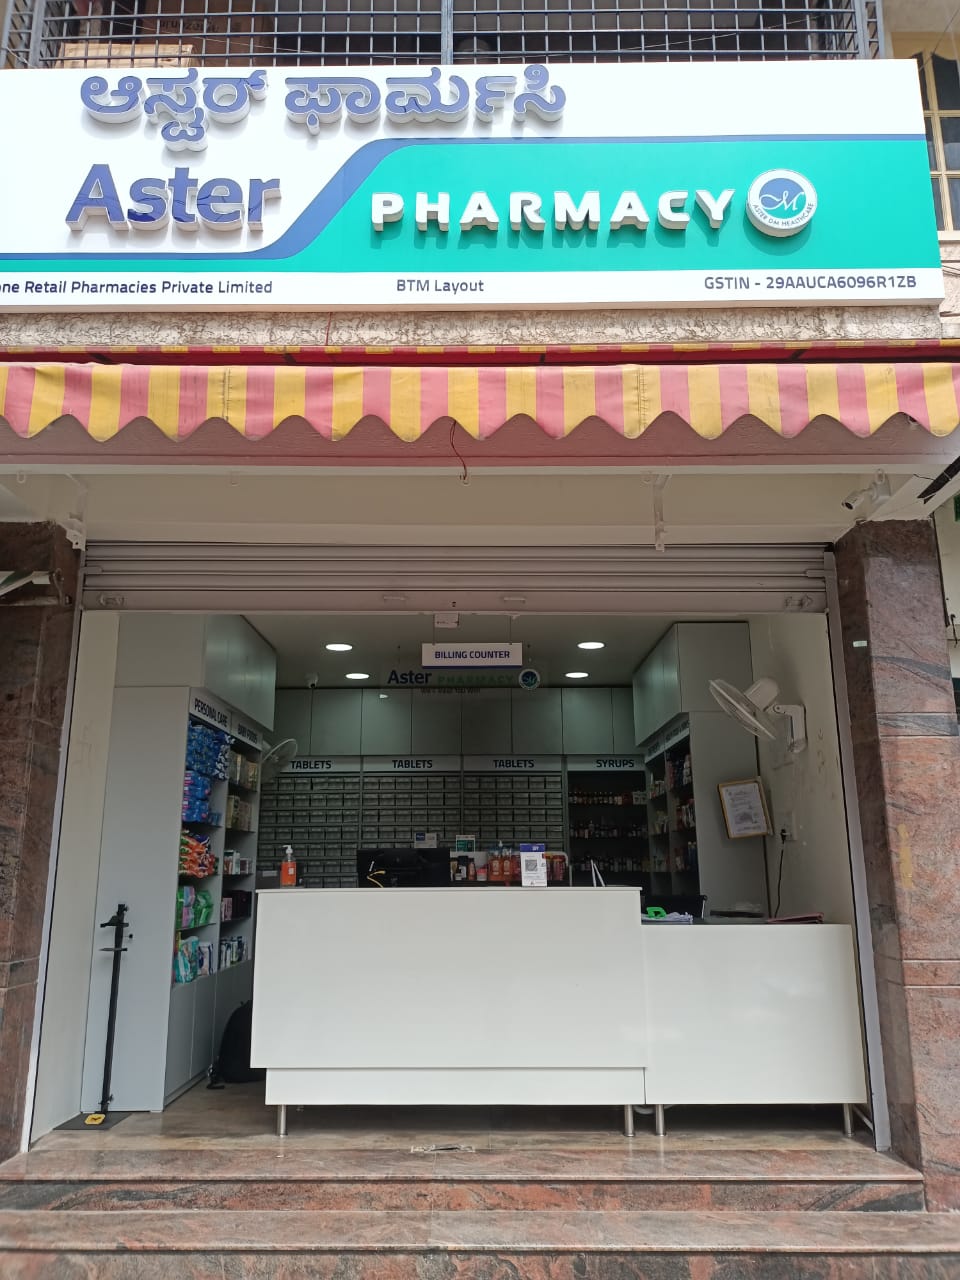 Aster Pharmacy in BTM Layout, Bangalore